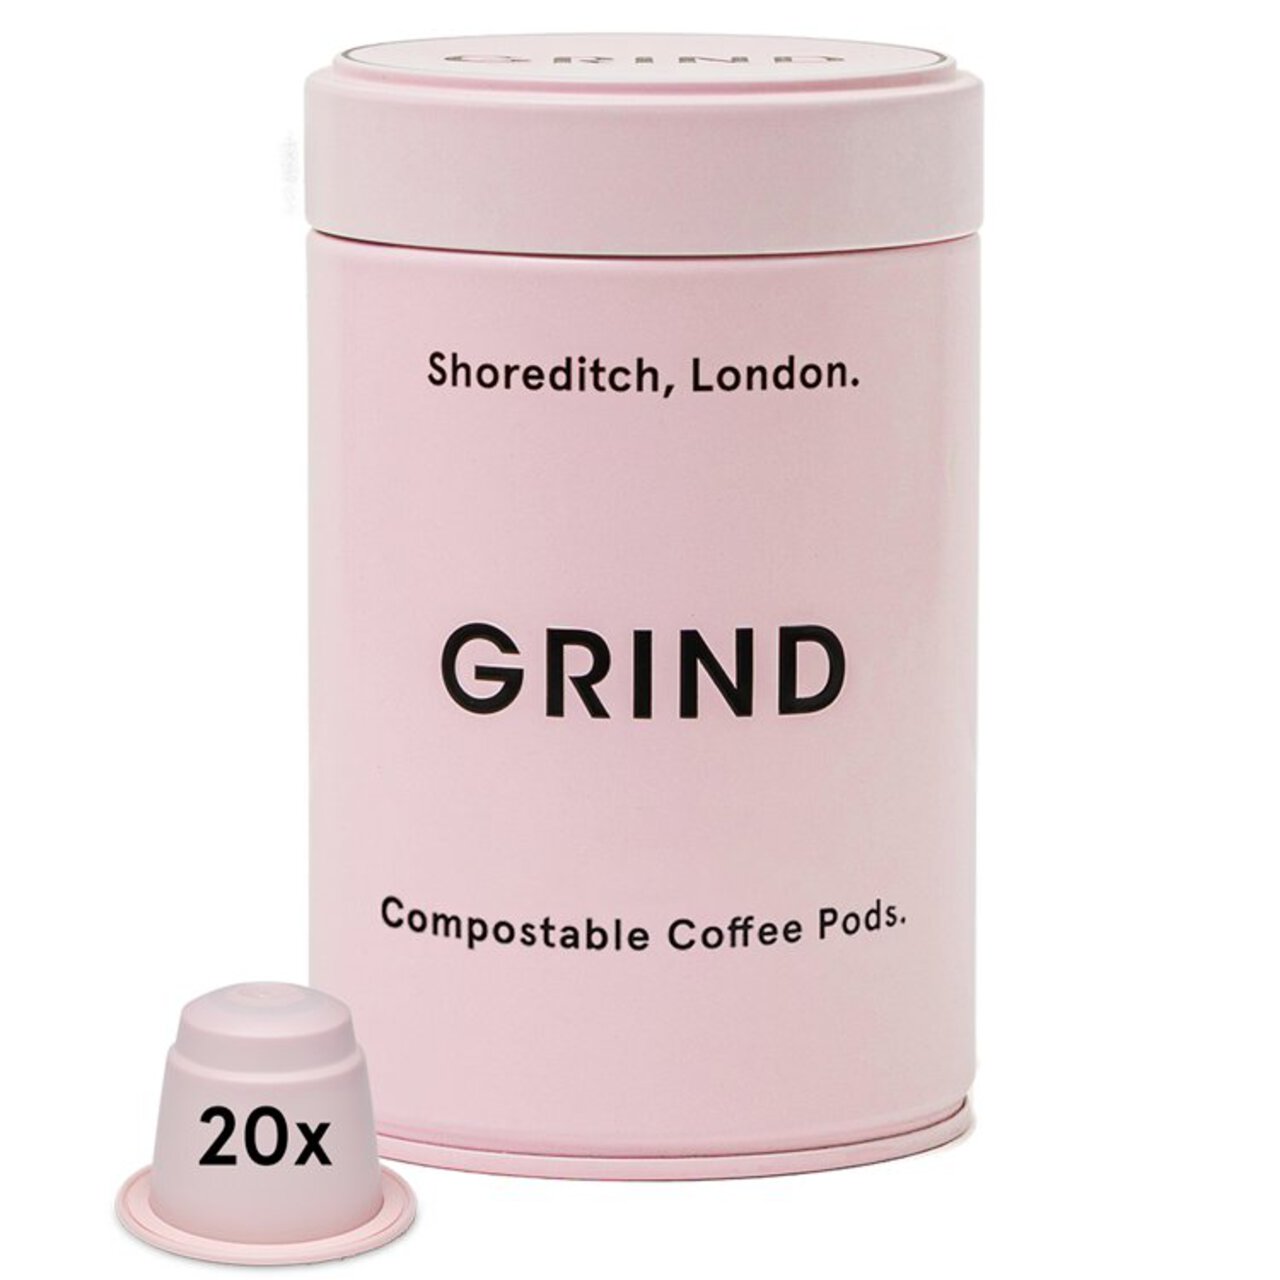 Grind House Blend Compostable Coffee Pods Tin 20 per pack